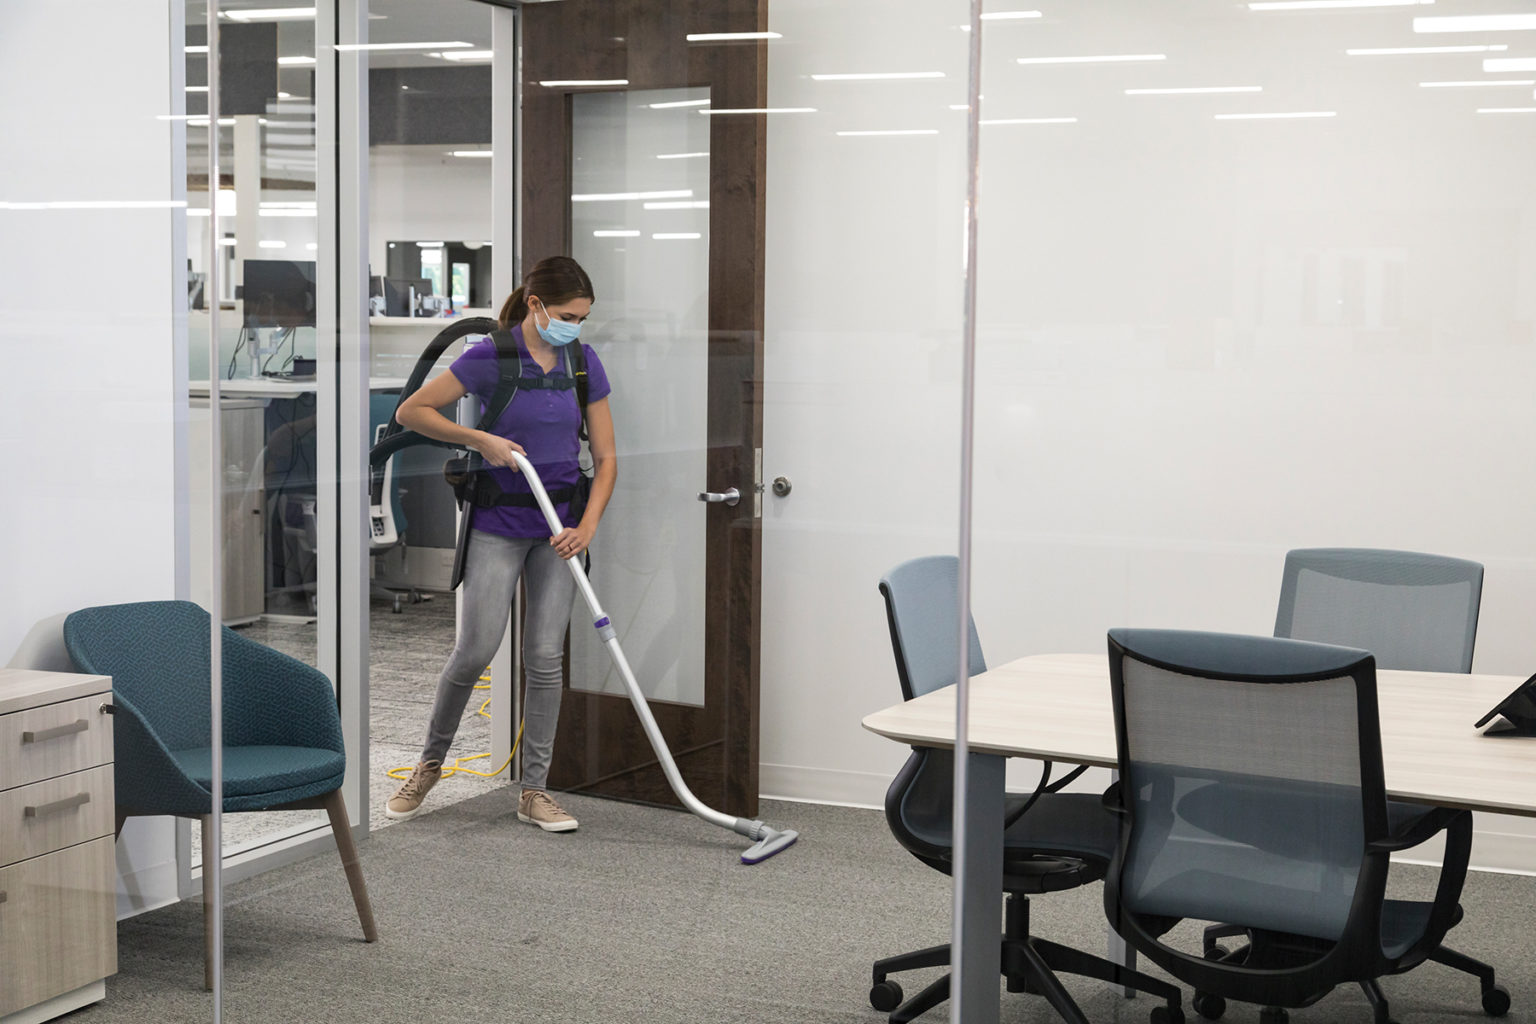 4M Building Solutions Wins 2020 Cleaning for Health Award with Strong Practices